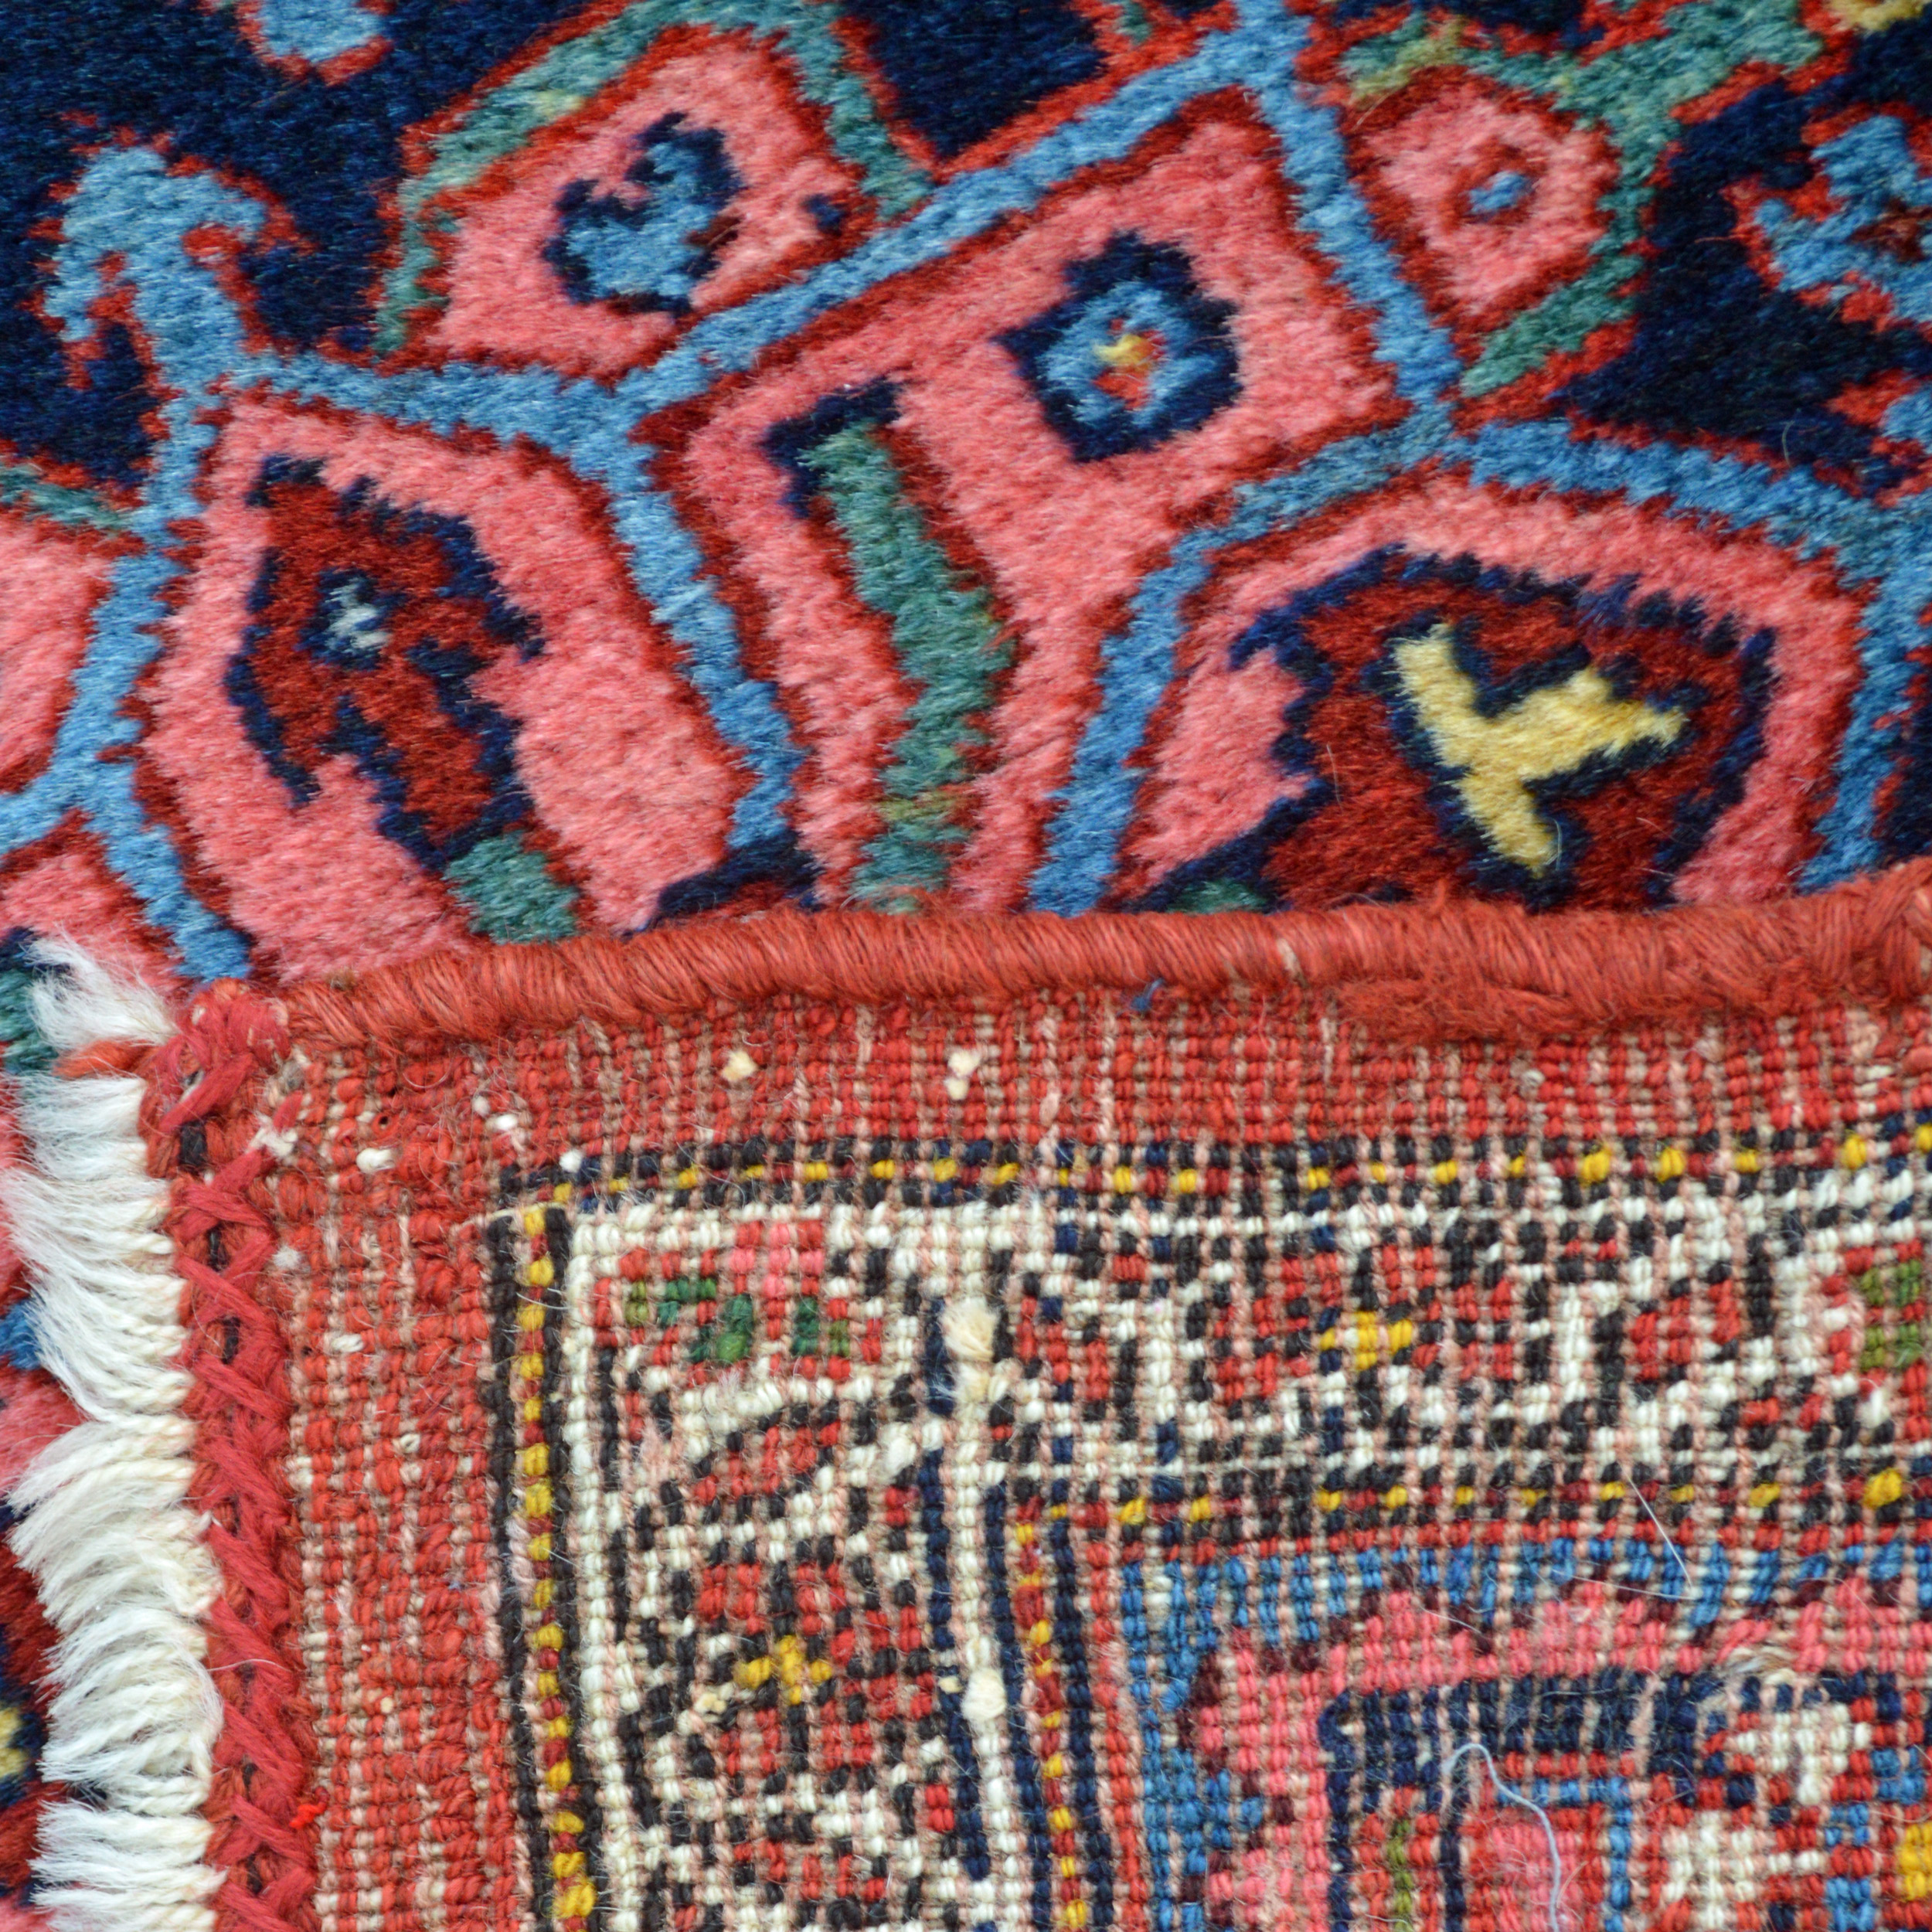 Weave detail from an antique Persian Bidjar rug, Douglas Stock Gallery, antique Persian rugs Boston,MA area, antique rugs New England